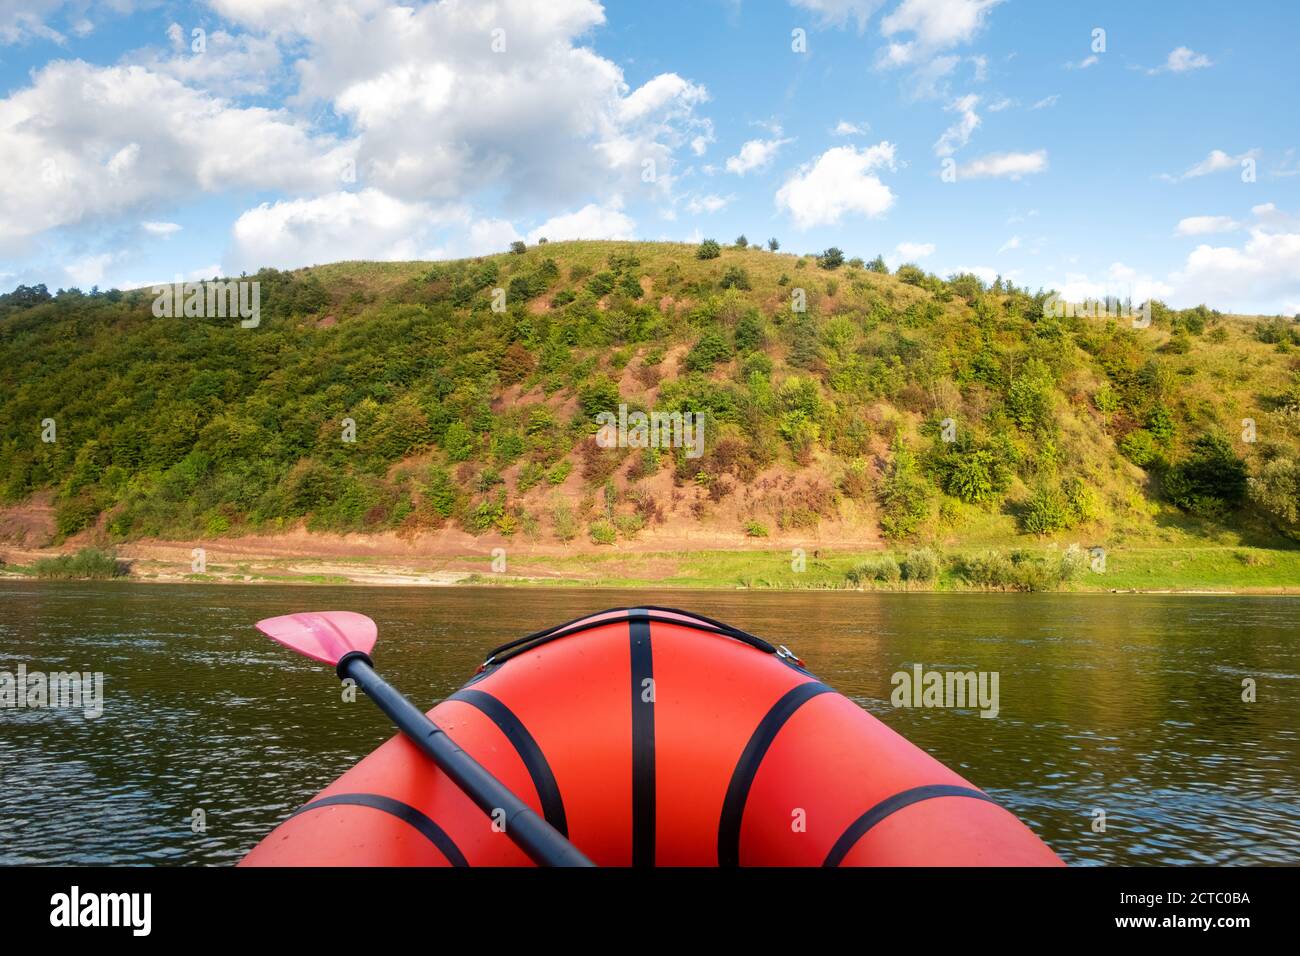 Orange packraft rubber boat on a river. Packrafting. Active lifestile concept Stock Photo